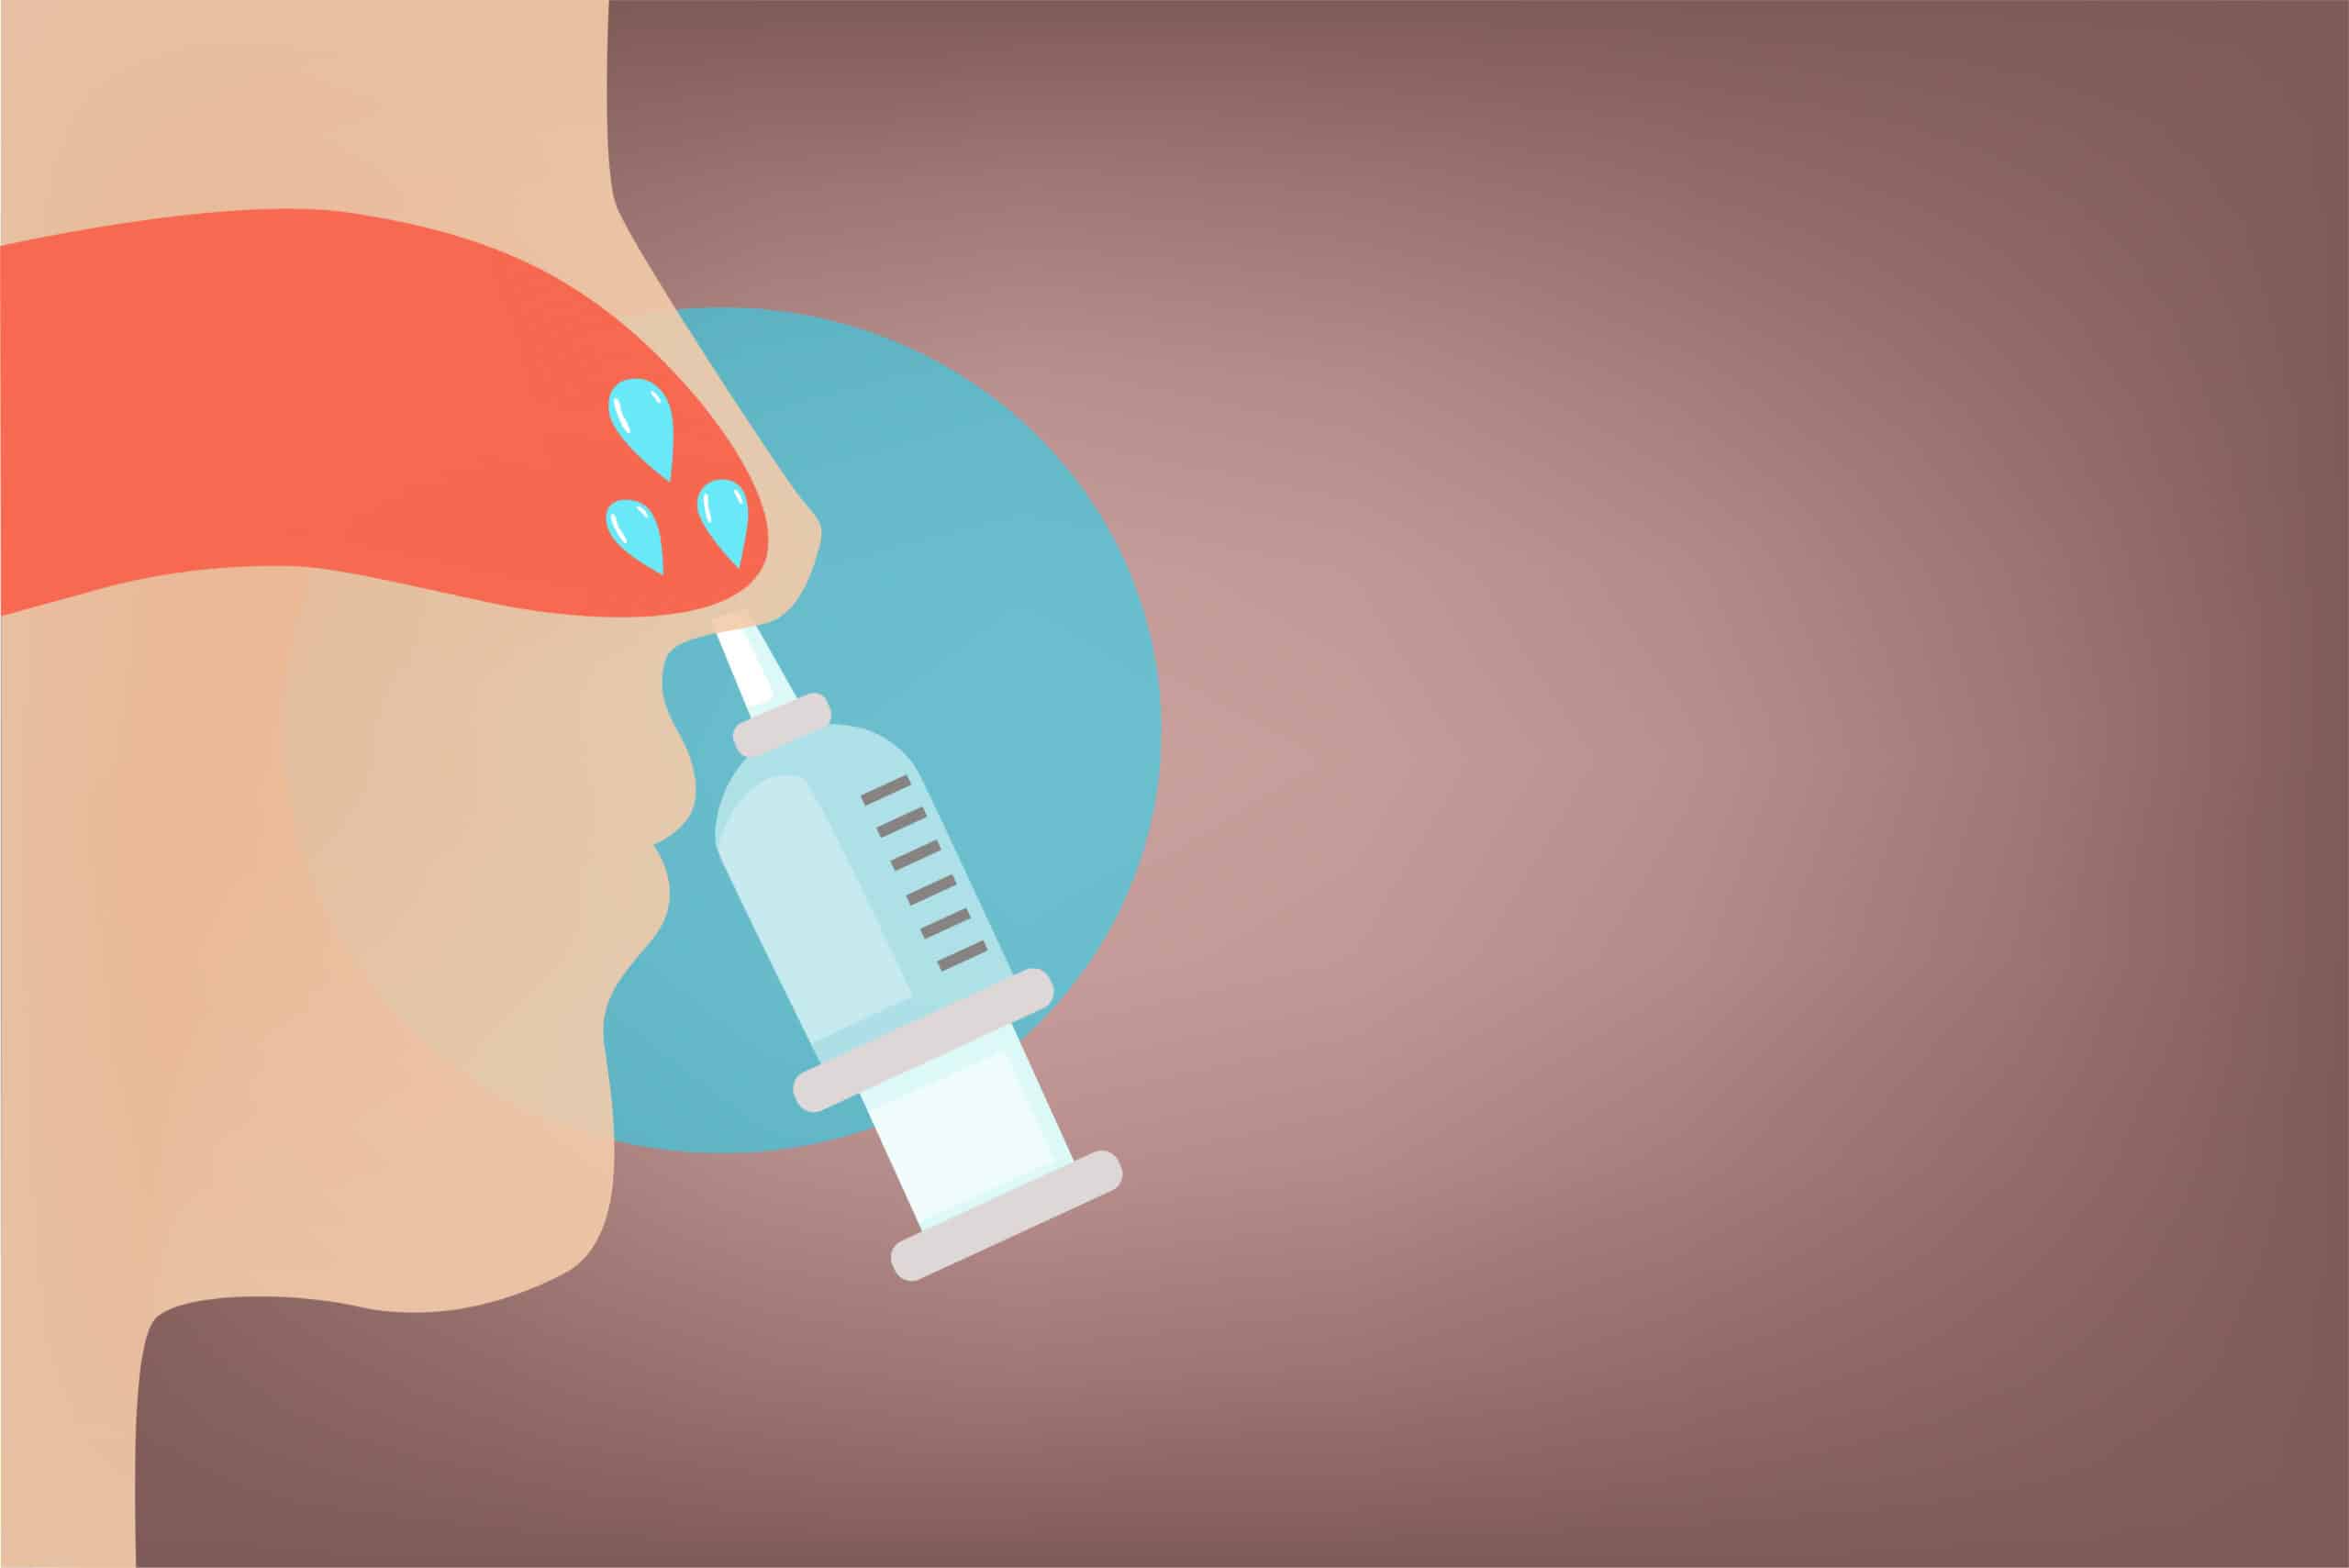 Does Nasal Irrigation Really Work?